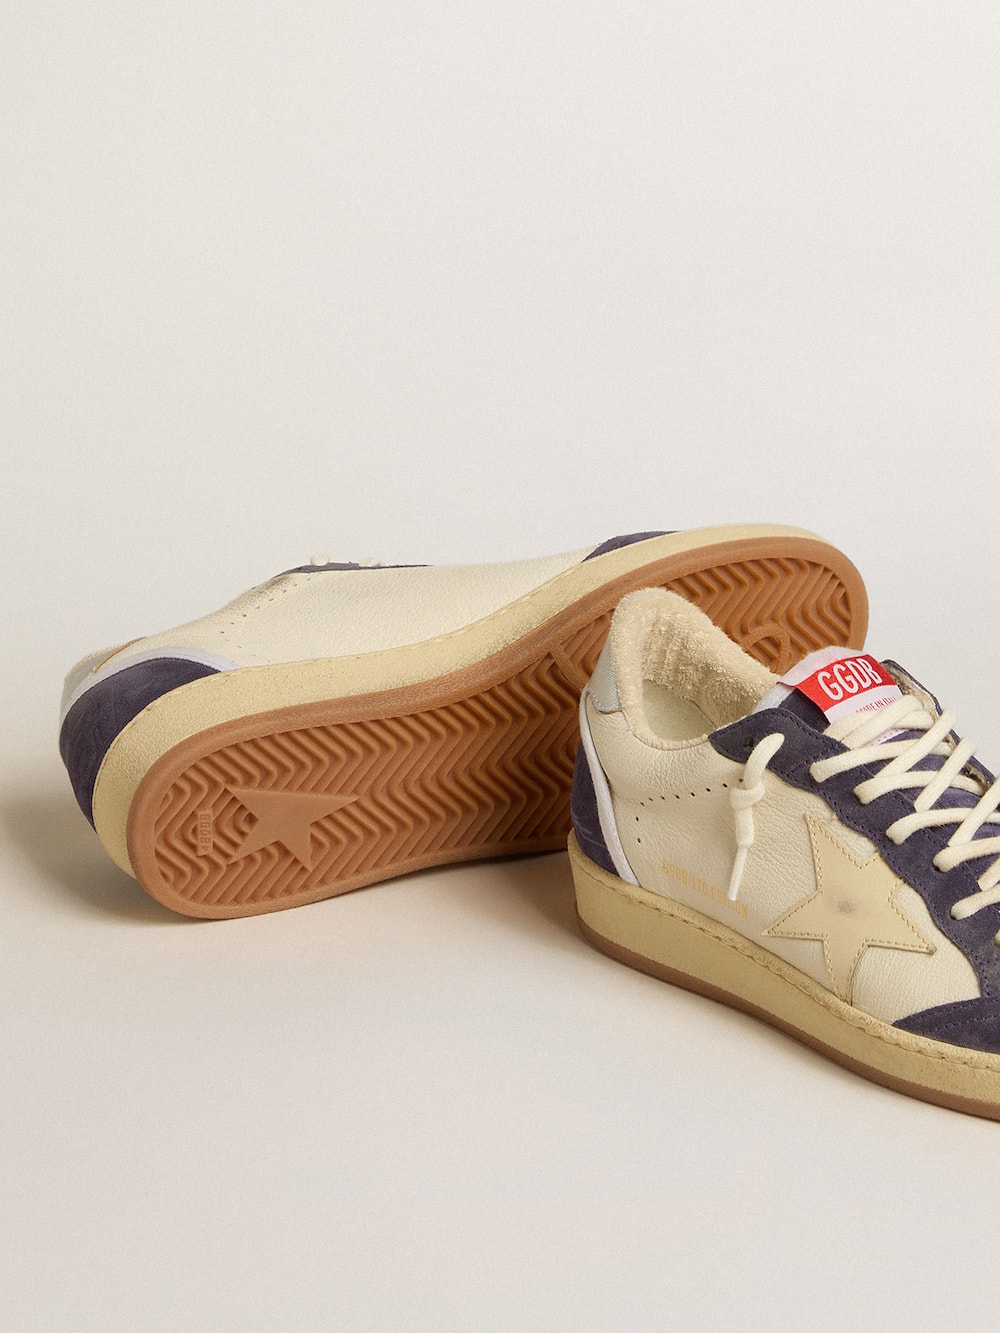 Golden Goose - Ball Star LTD in nappa leather and suede with cream star and silver heel tab in 